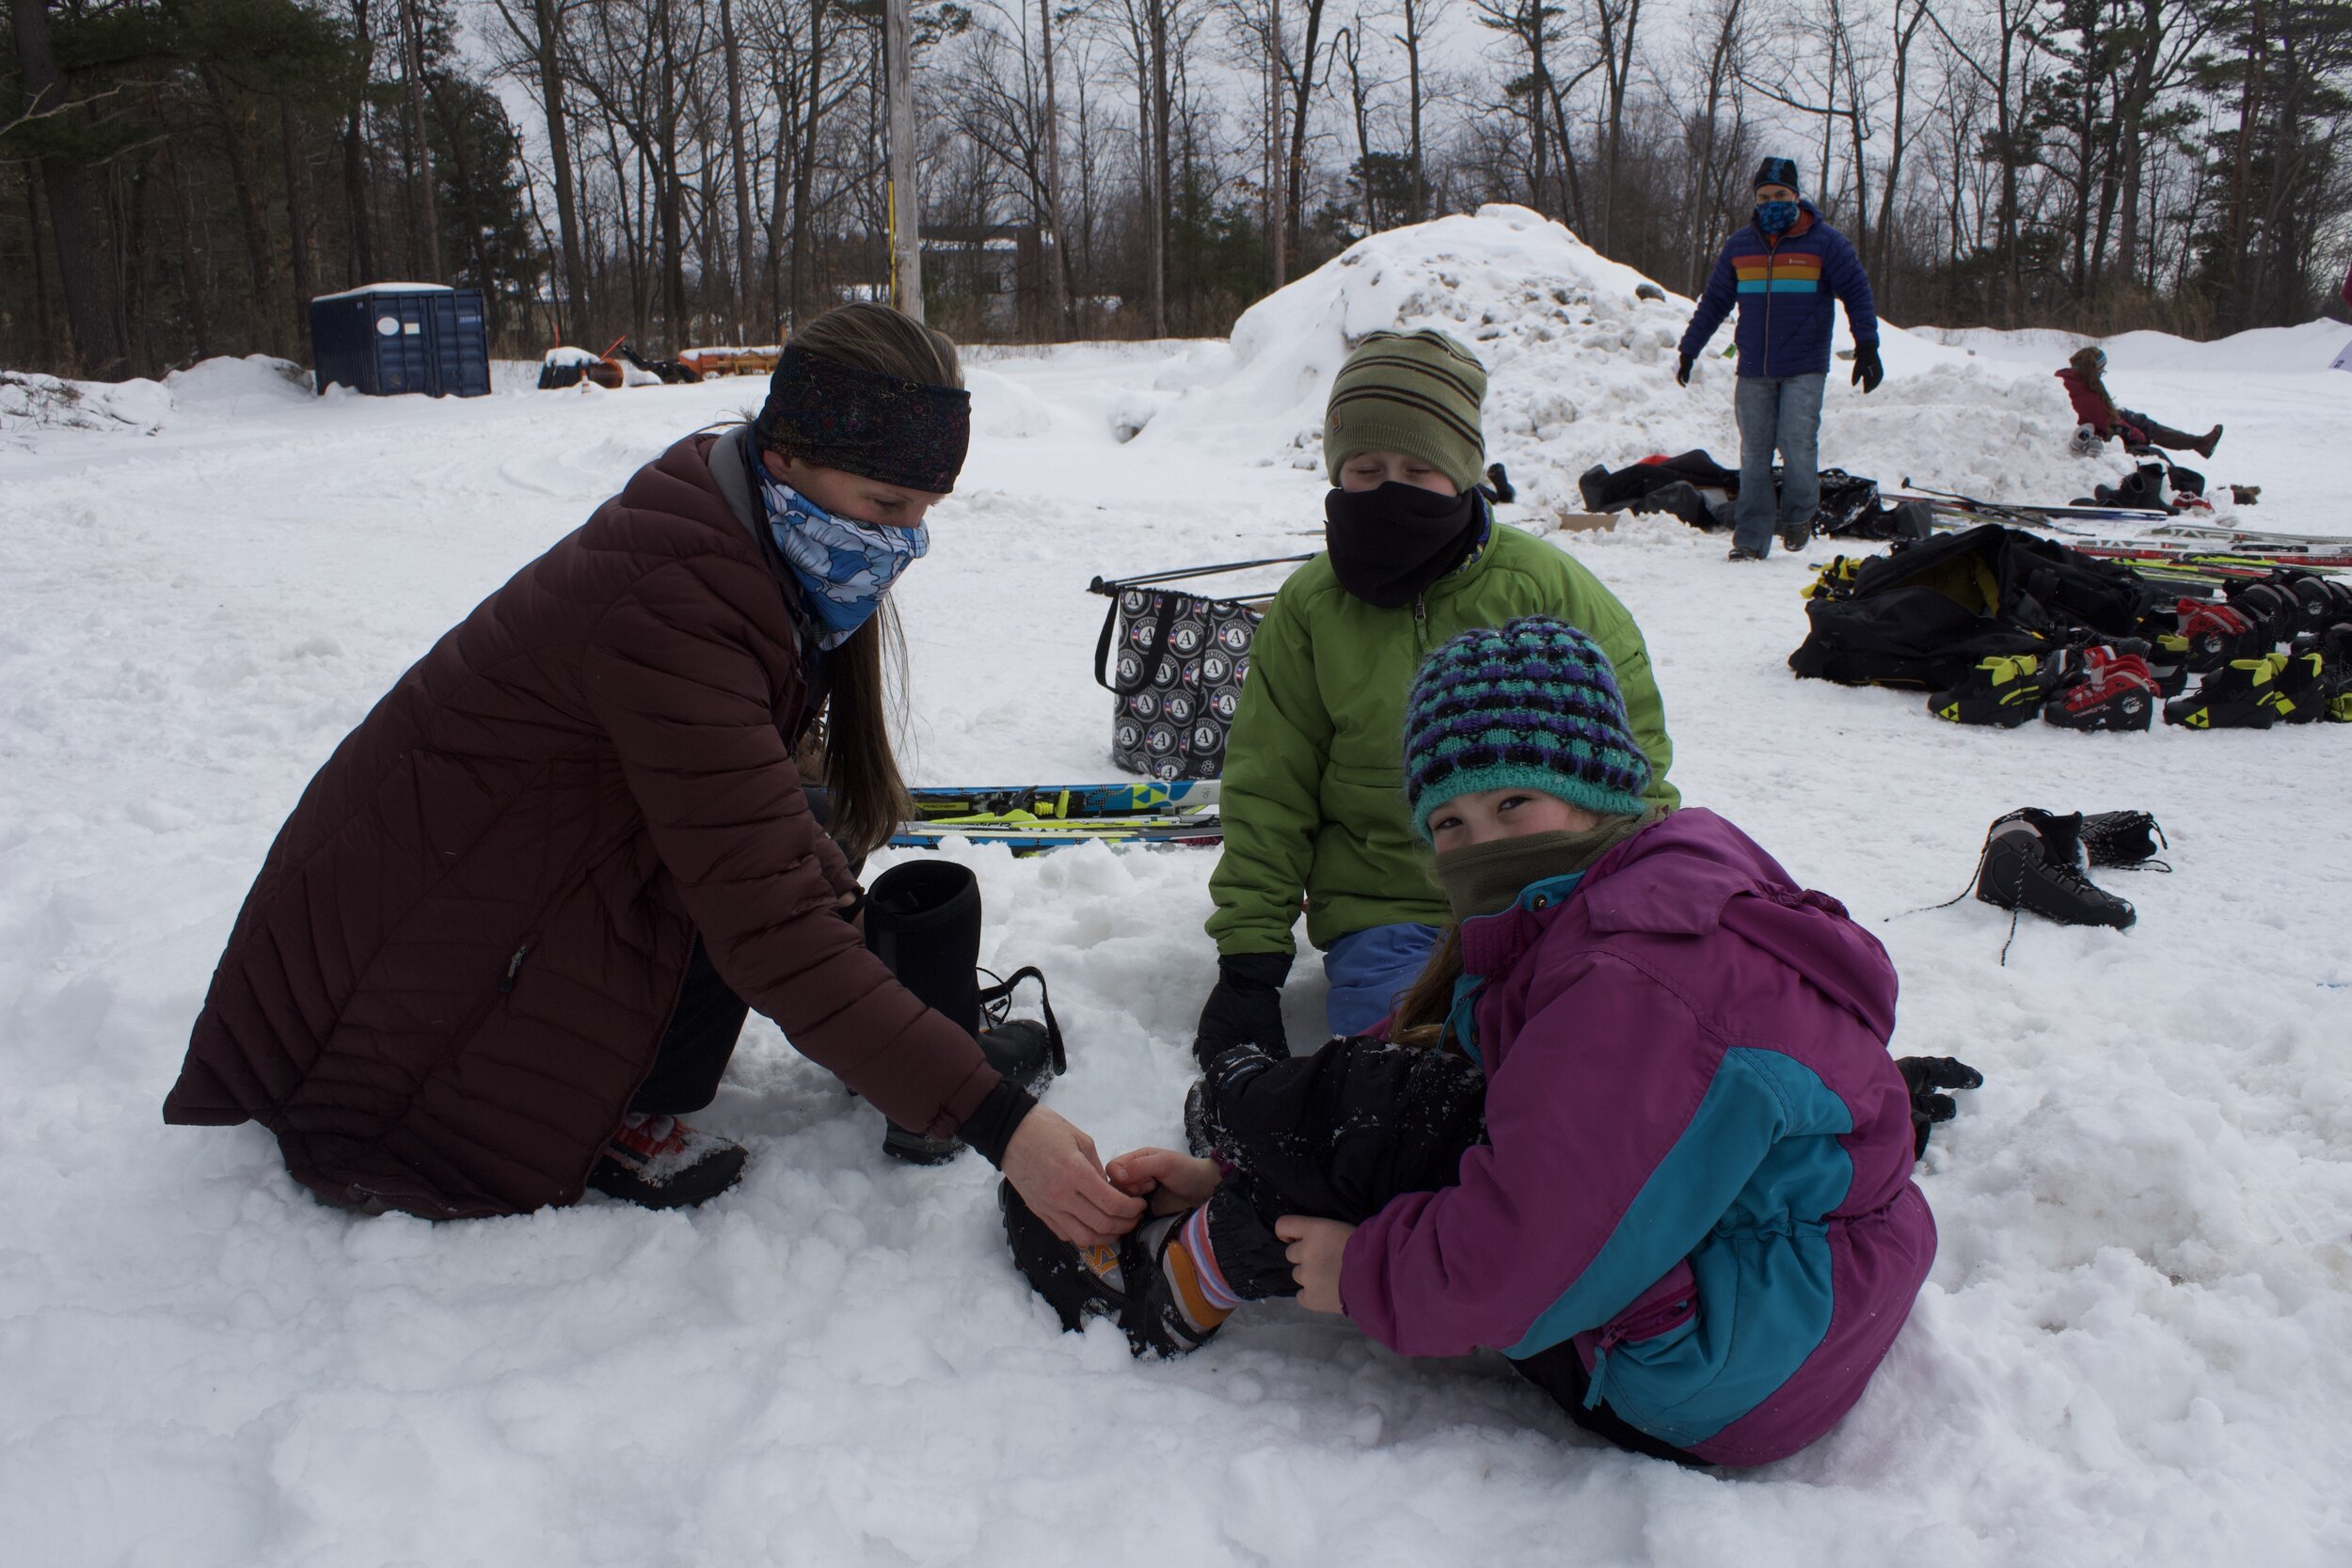   Mother Cathy helps her daughter Amelia get her ski boots on before heading out onto the trail together.  